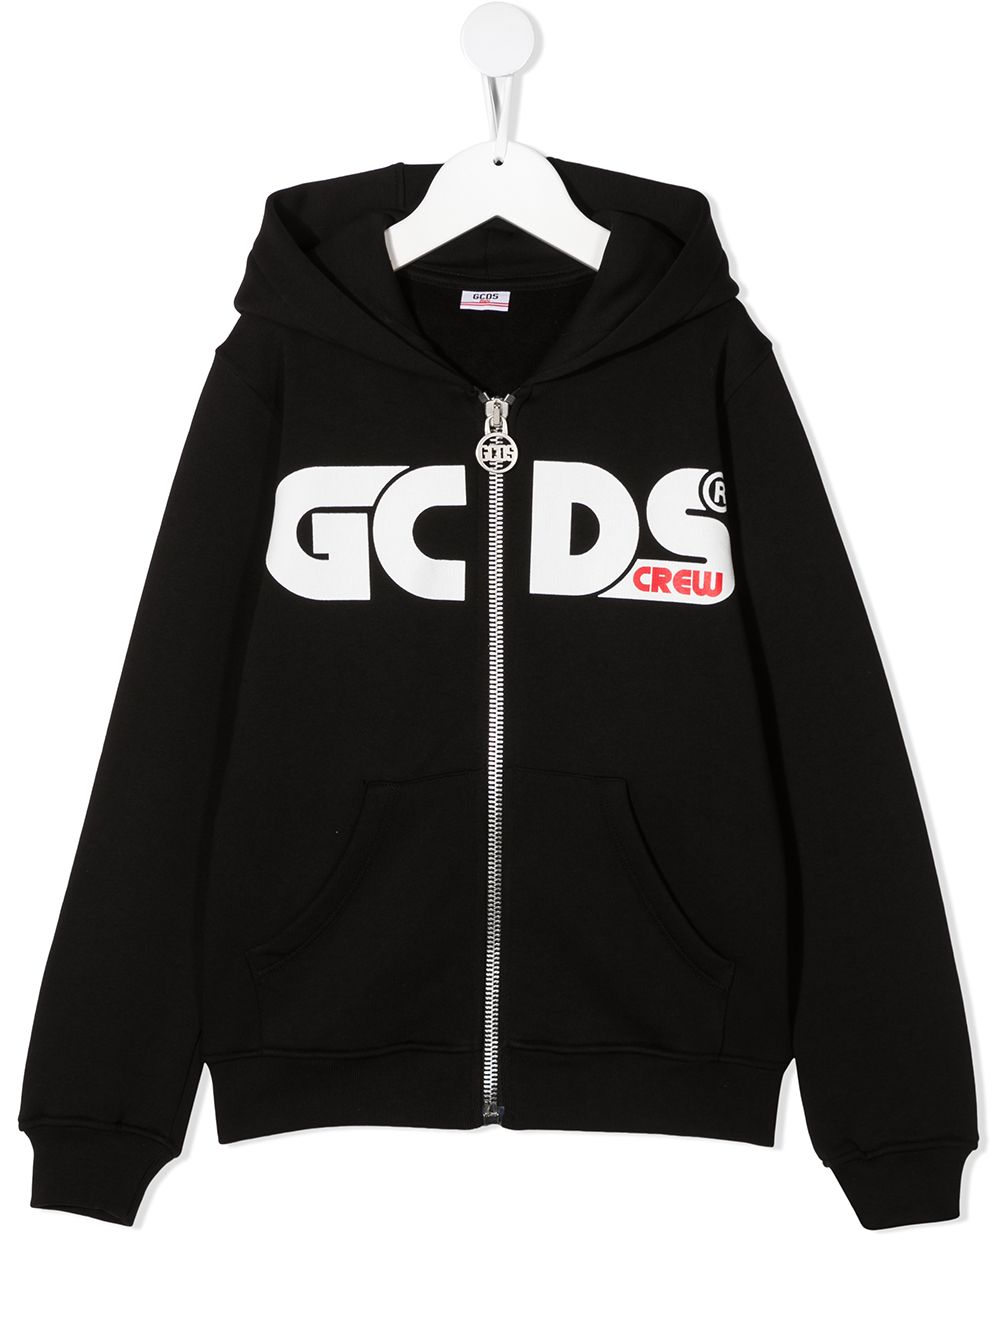 Compare gcds kids logo print hoodie - black products from over 25,000 ...